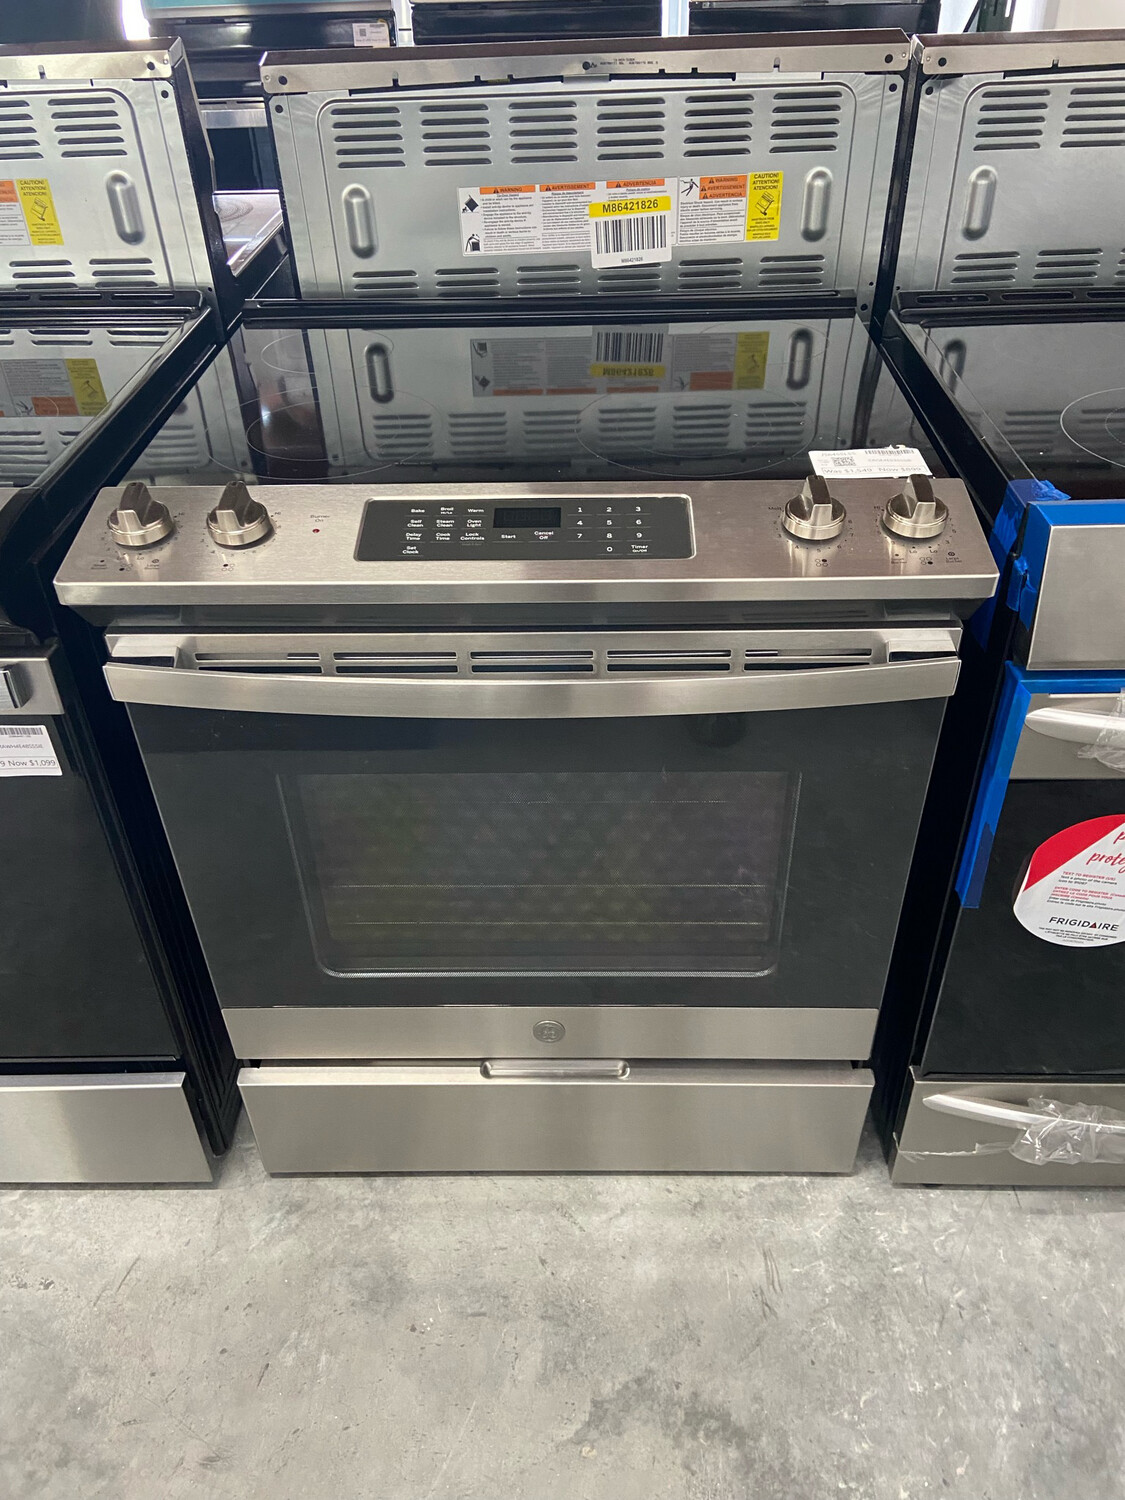 GE 30” Slide-In Electric Range 5.3 cu ft Stainless Steel Self Cleaning Smooth Surface. Model JS645SLSS. MSRP $1549